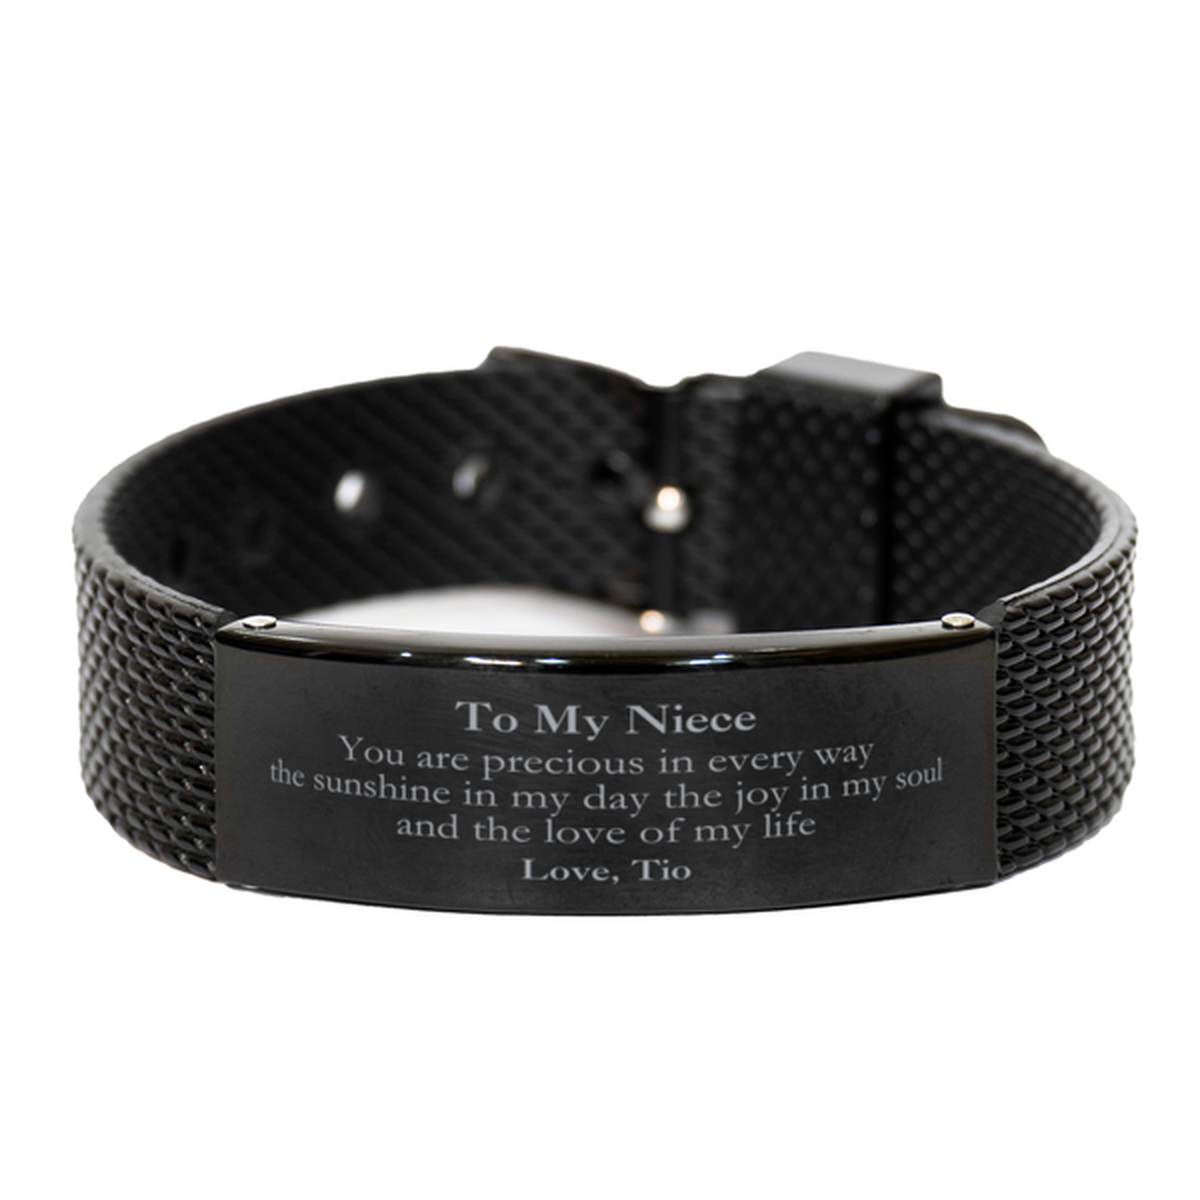 Graduation Gifts for Niece Black Shark Mesh Bracelet Present from Tio, Christmas Niece Birthday Gifts Niece You are precious in every way the sunshine in my day. Love, Tio